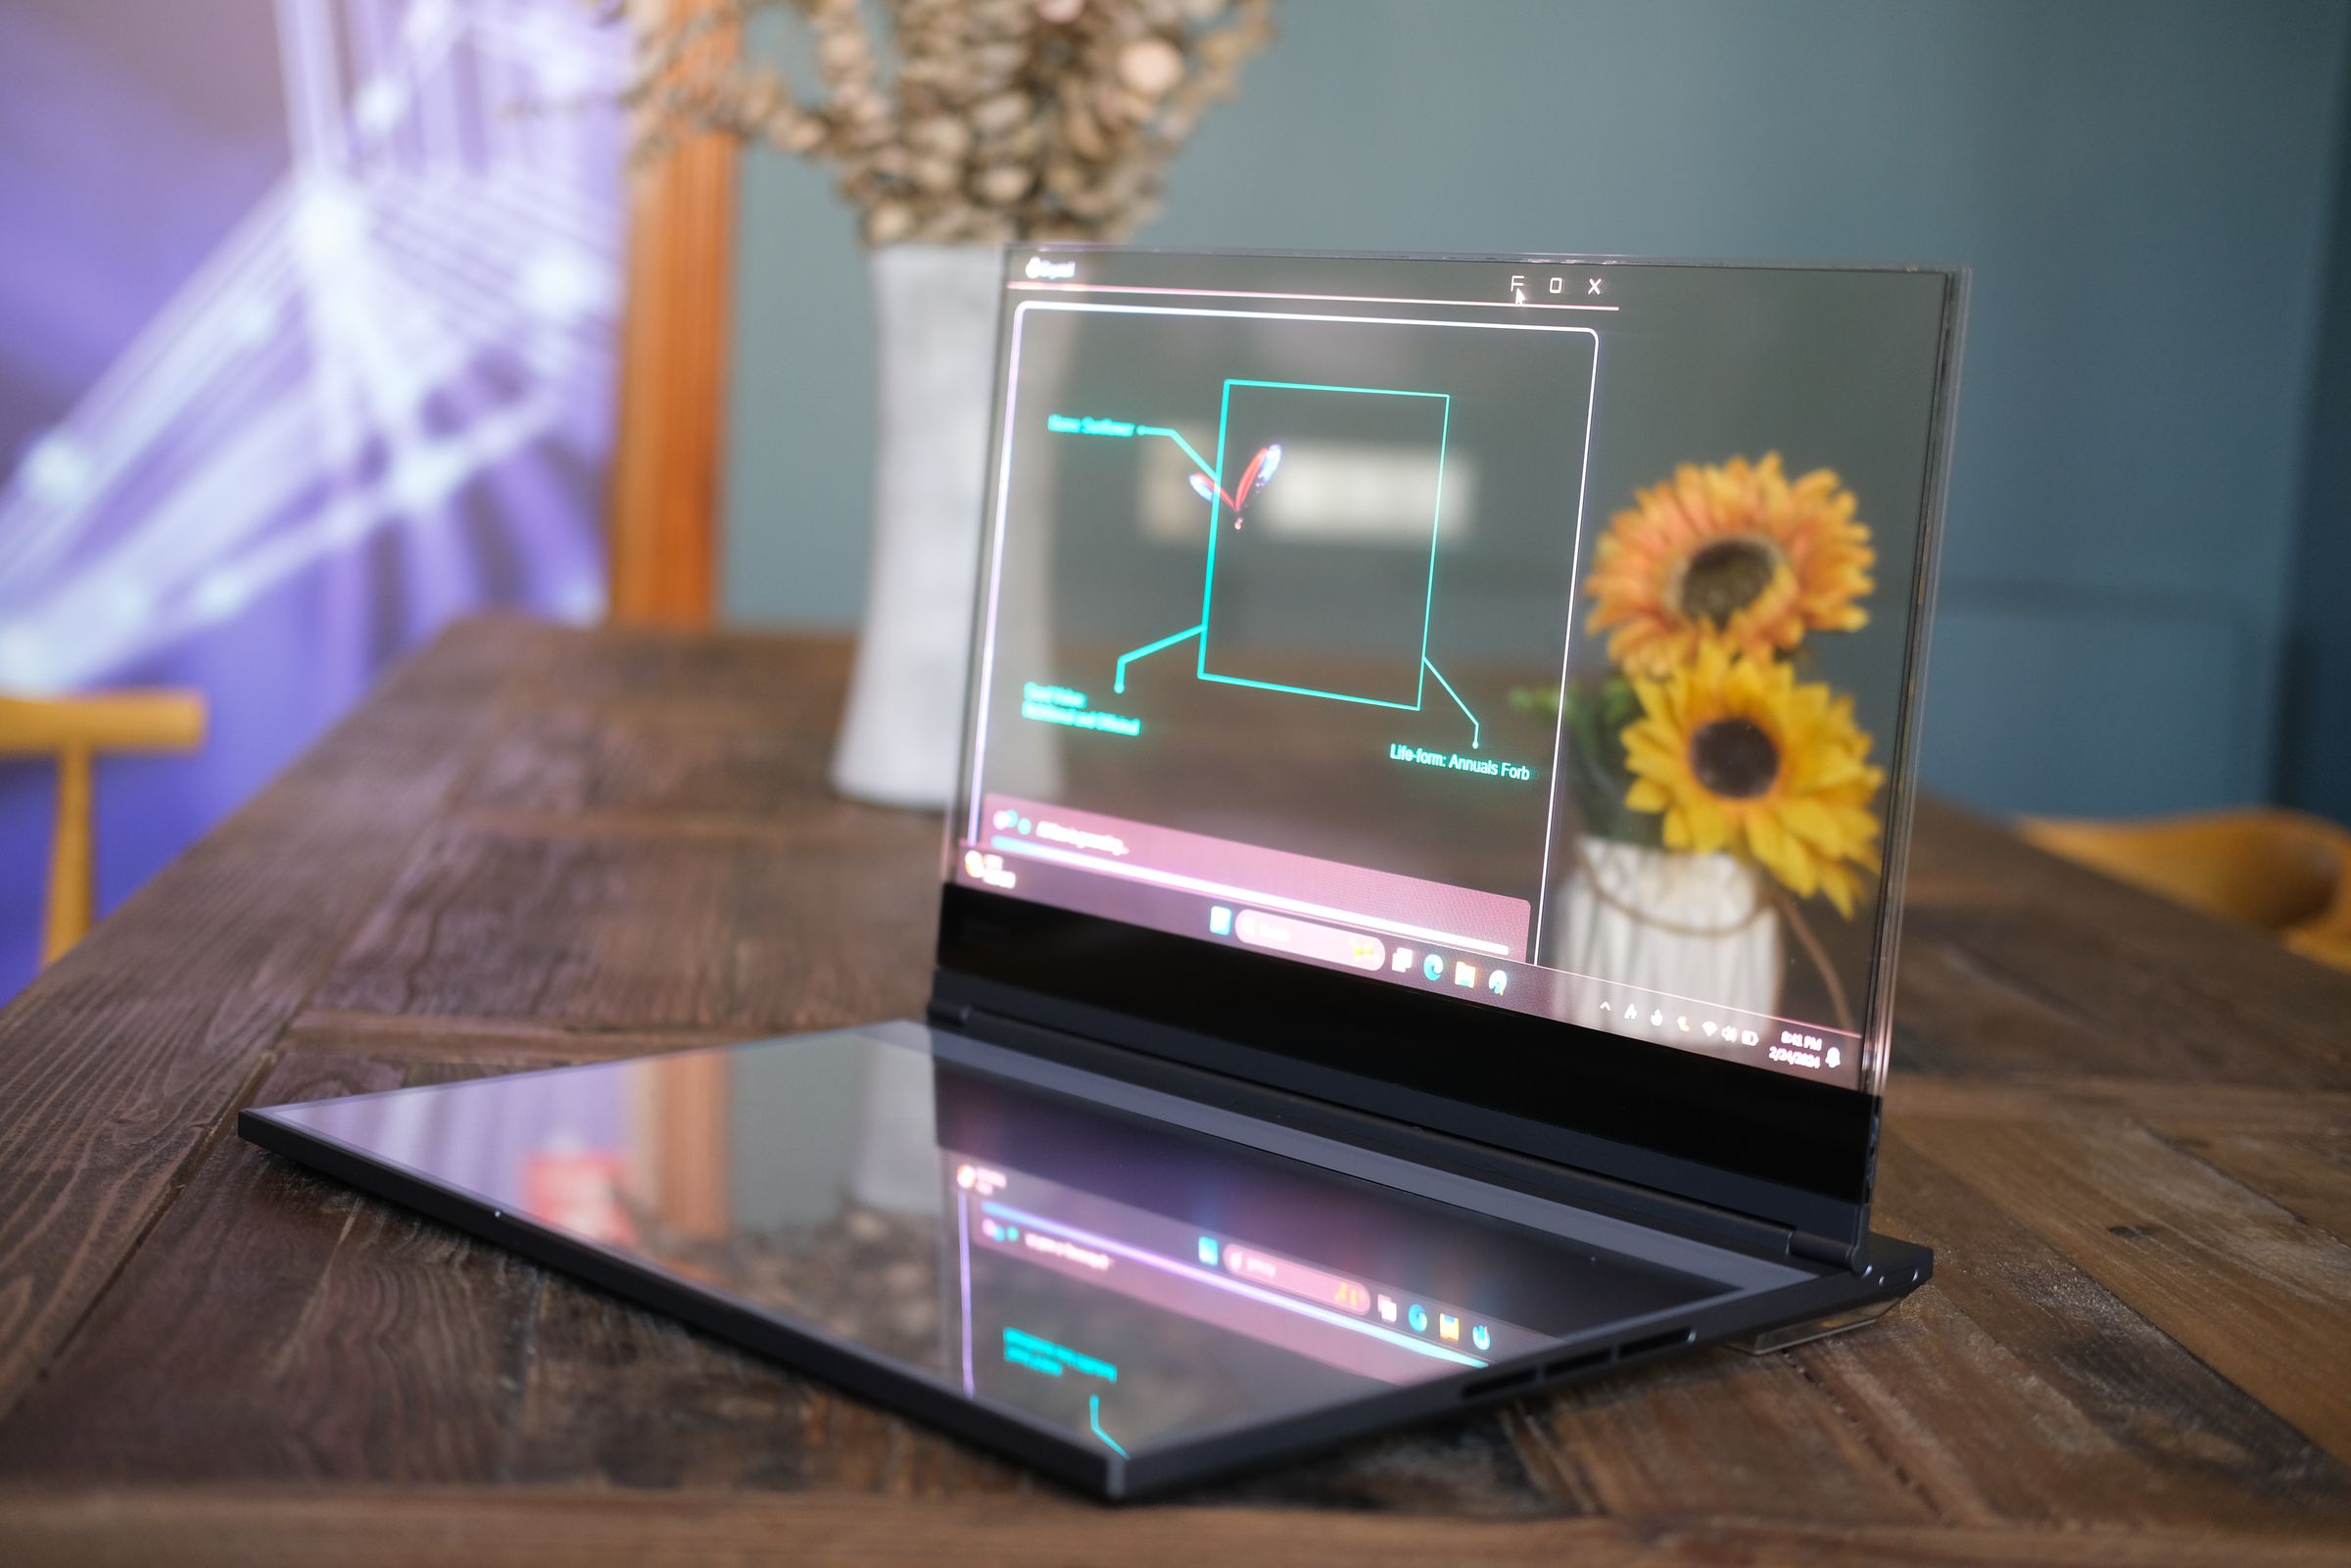 Transparent laptop with sunflowers visible behind it.